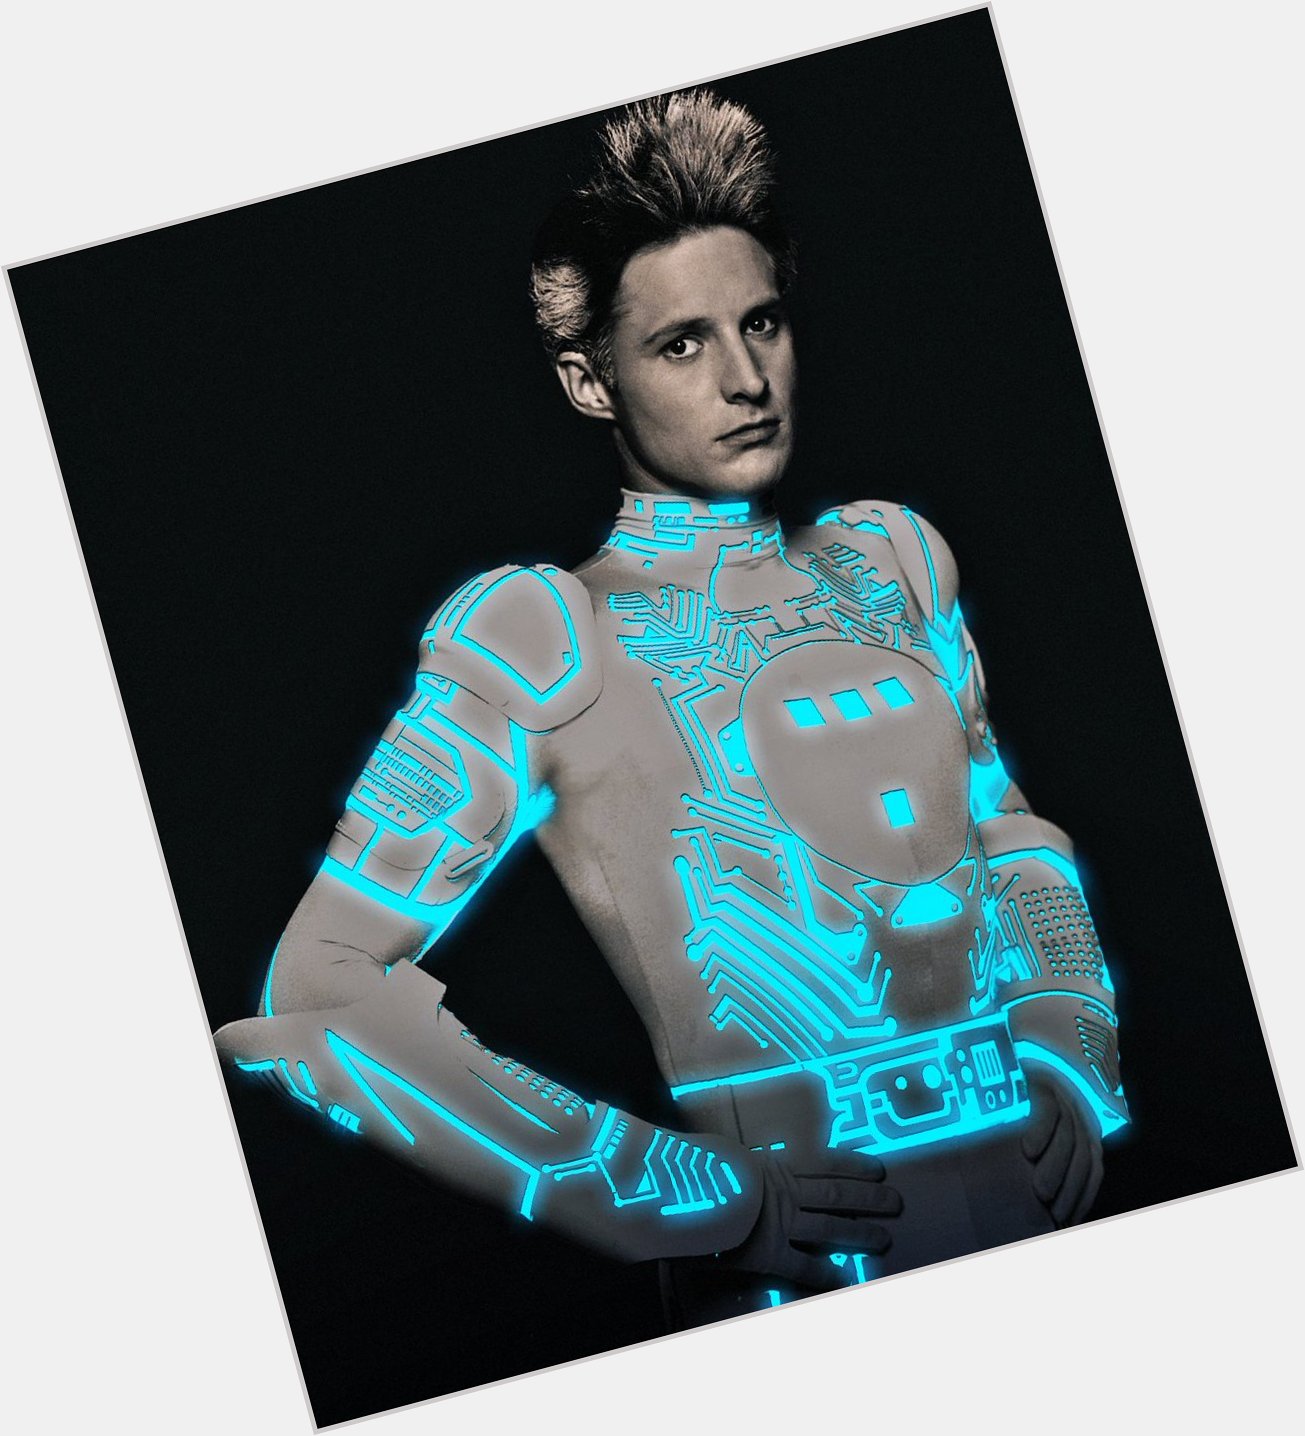 Happy Birthday Tron (Bruce Boxleitner)!

He fights for the users! 